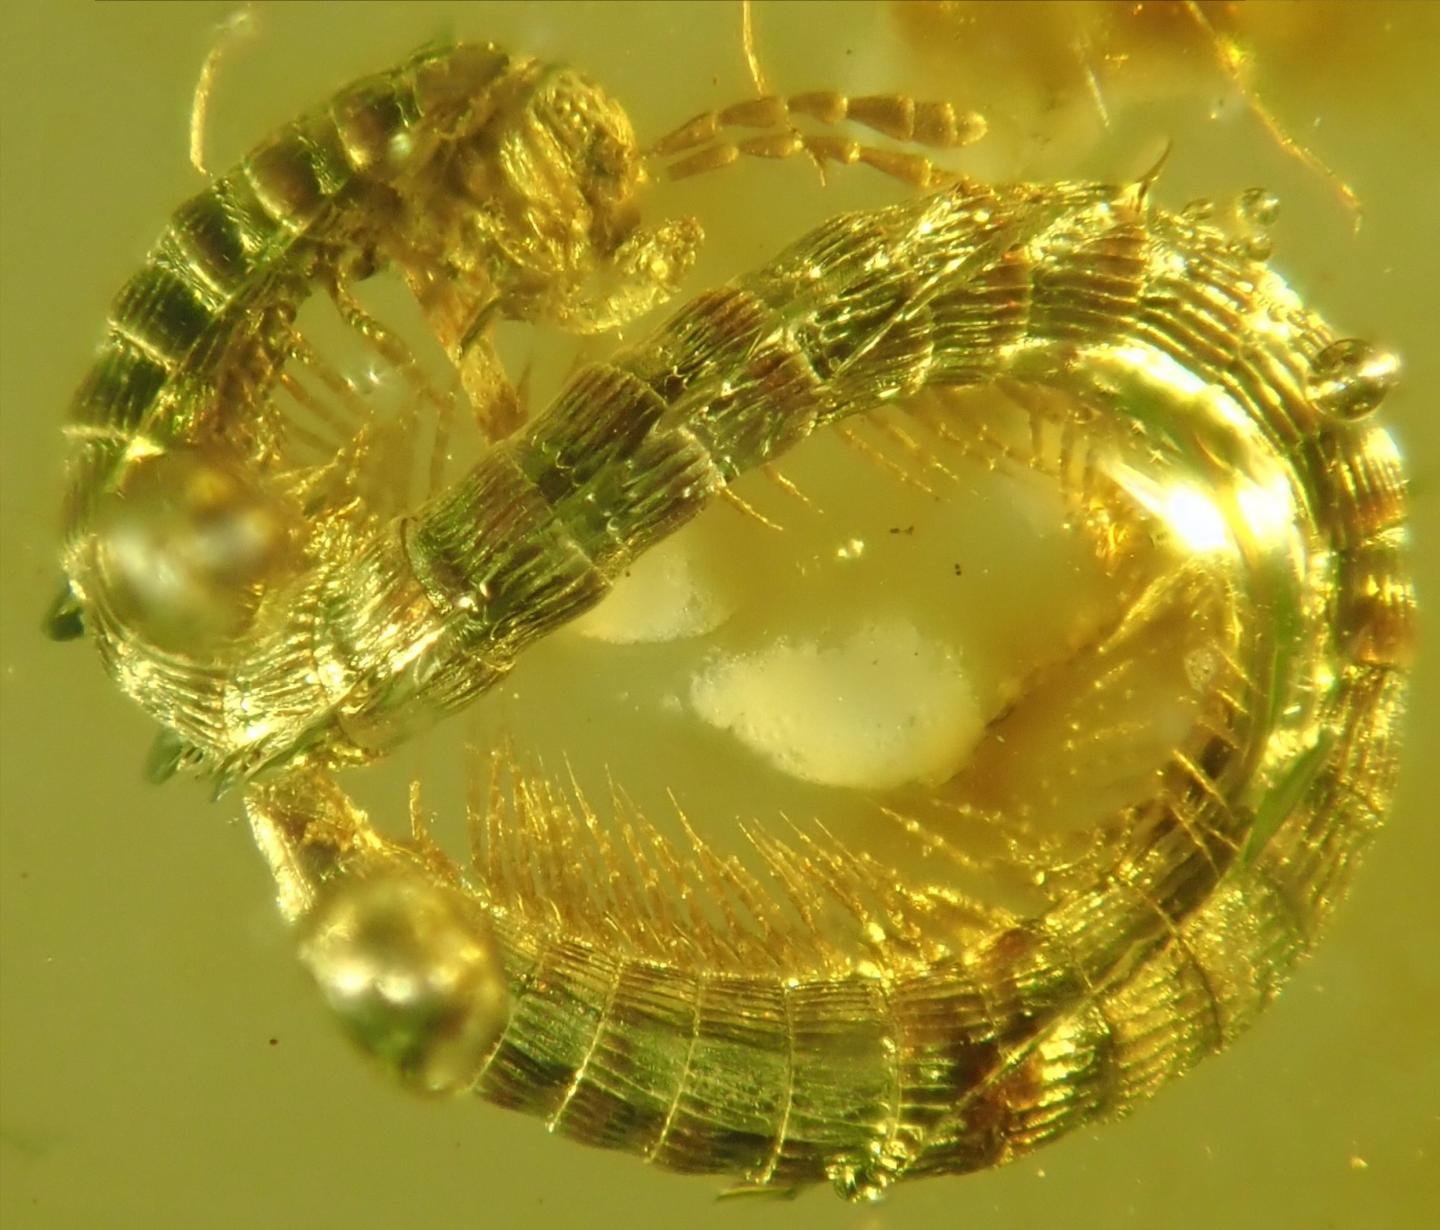 The Newly Described Millipede Seen in Amber